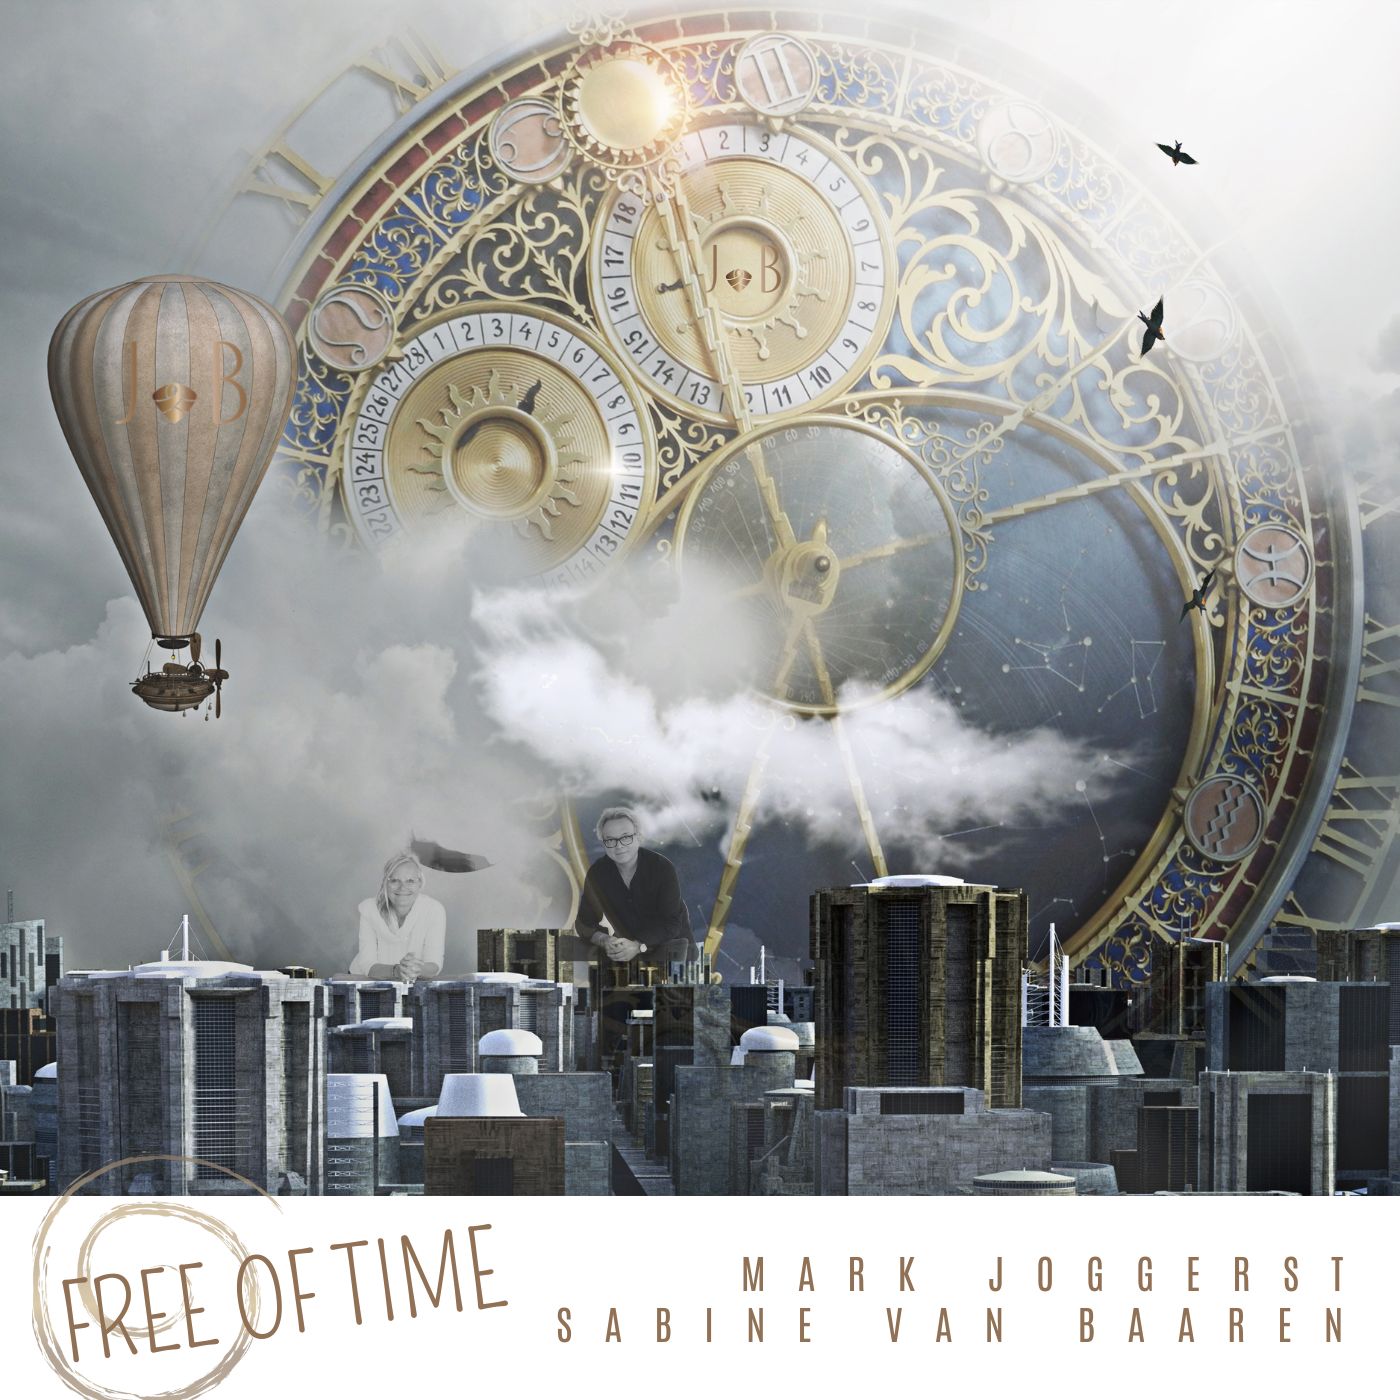 Free of time acoustic